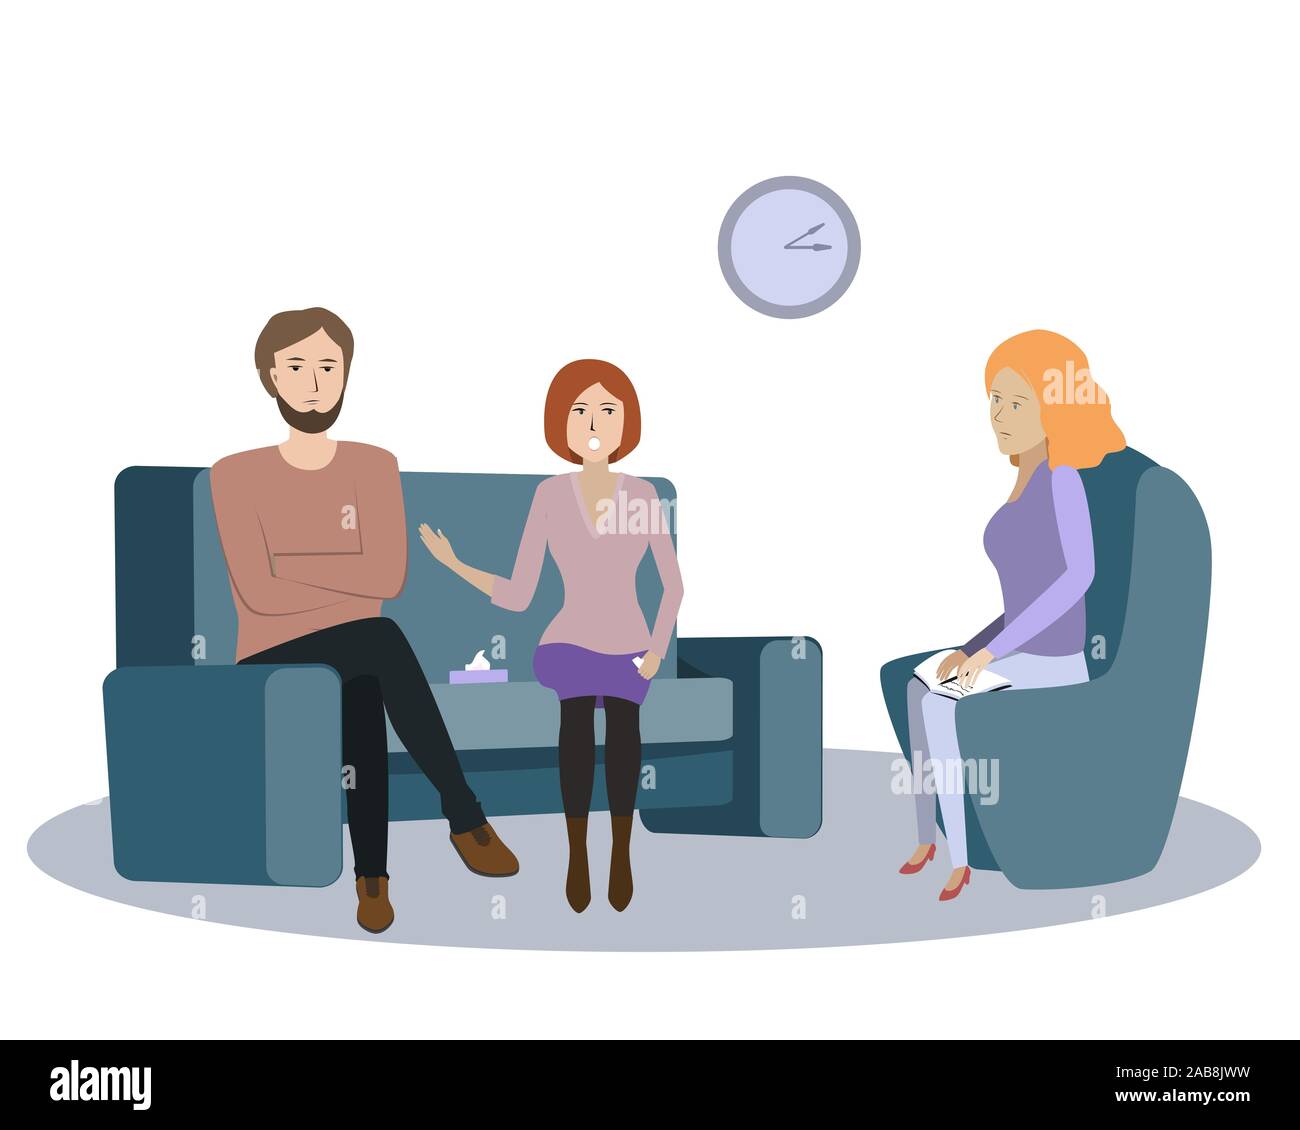 Family couple psychotherapy session, vector illustration. Young angry women speaks about her offence and resentment against the husband. Gestalt Stock Vector